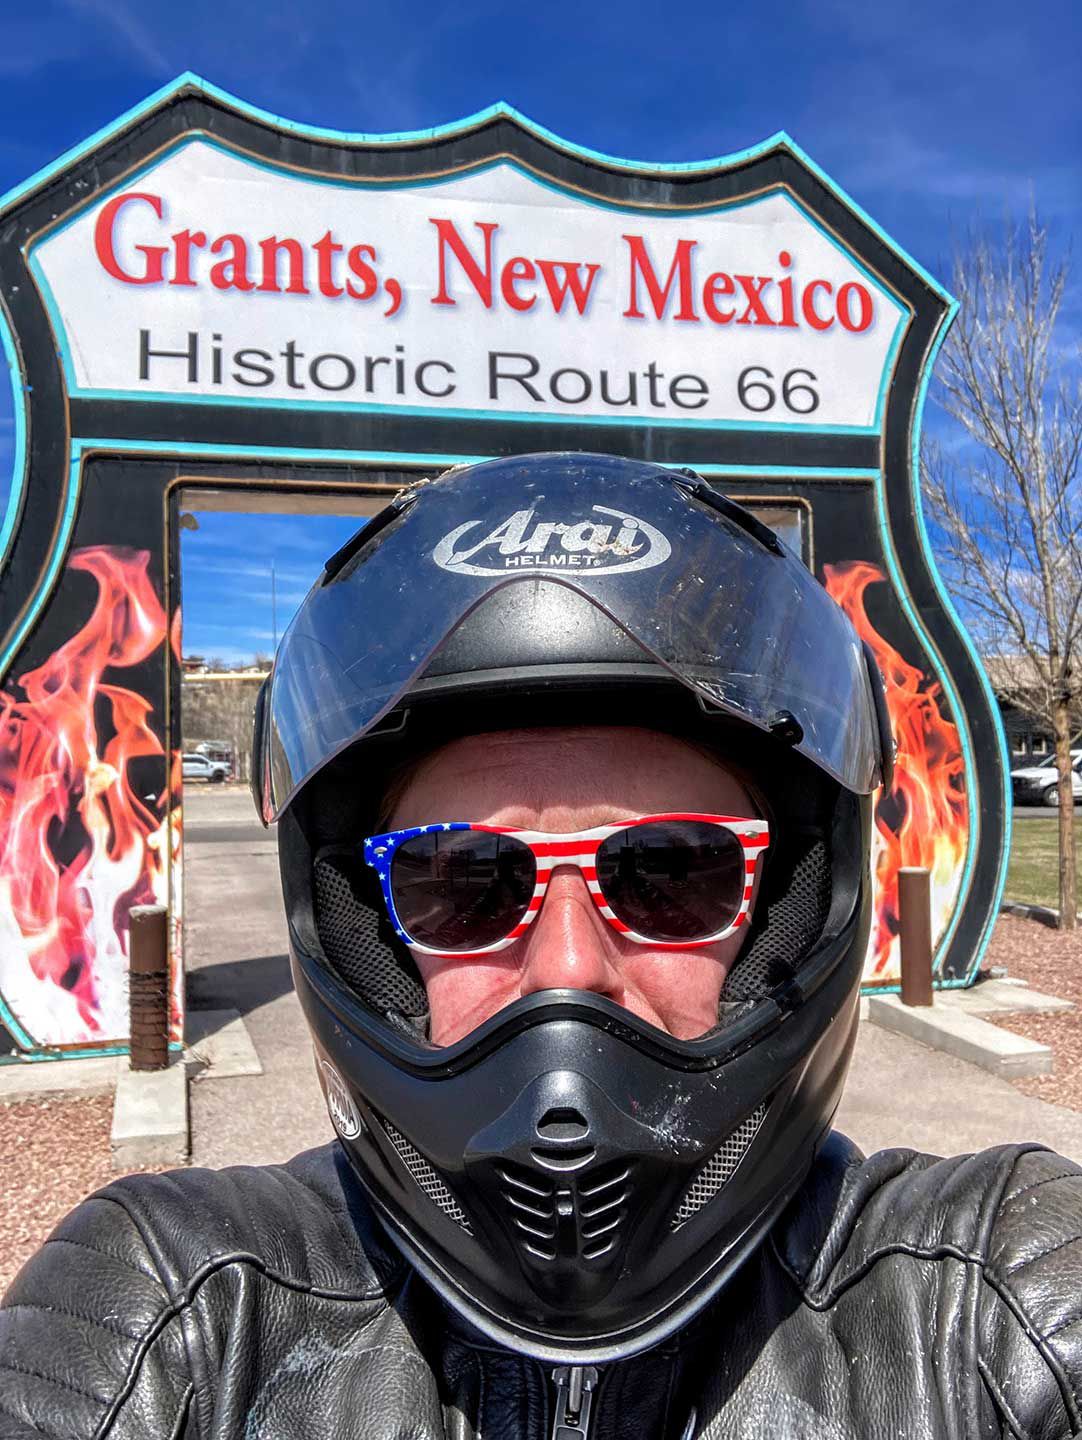 Drive through fun: 30 seconds worth of memories get made in Grants, NM.